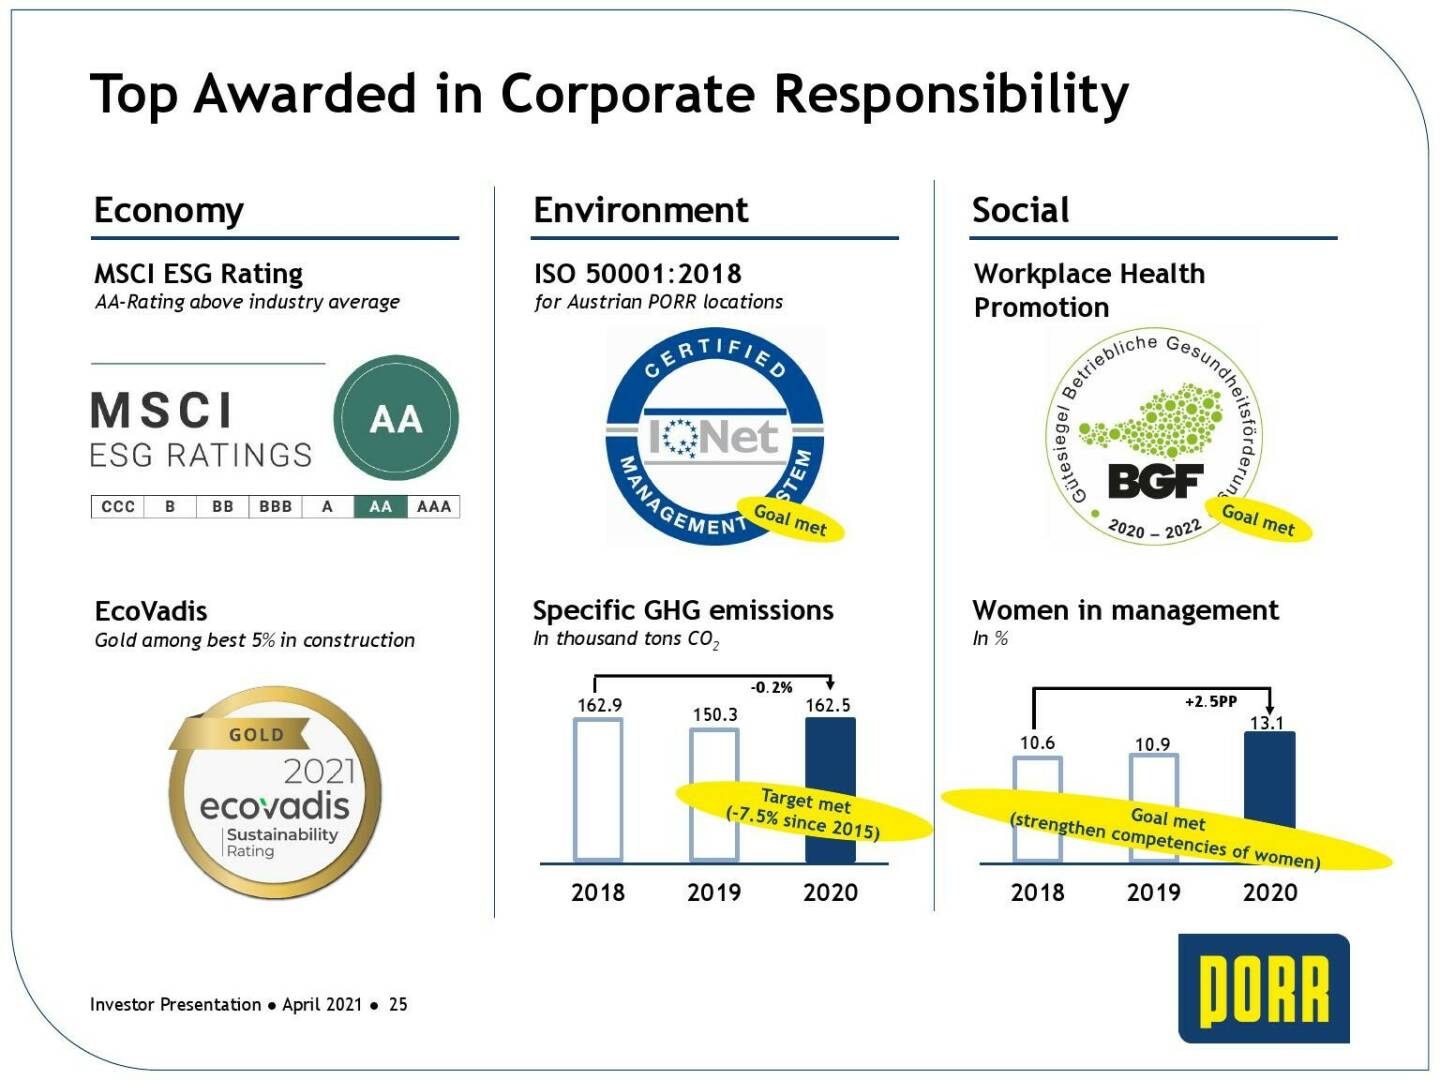 Porr - Top awarded in corporate responsibility 